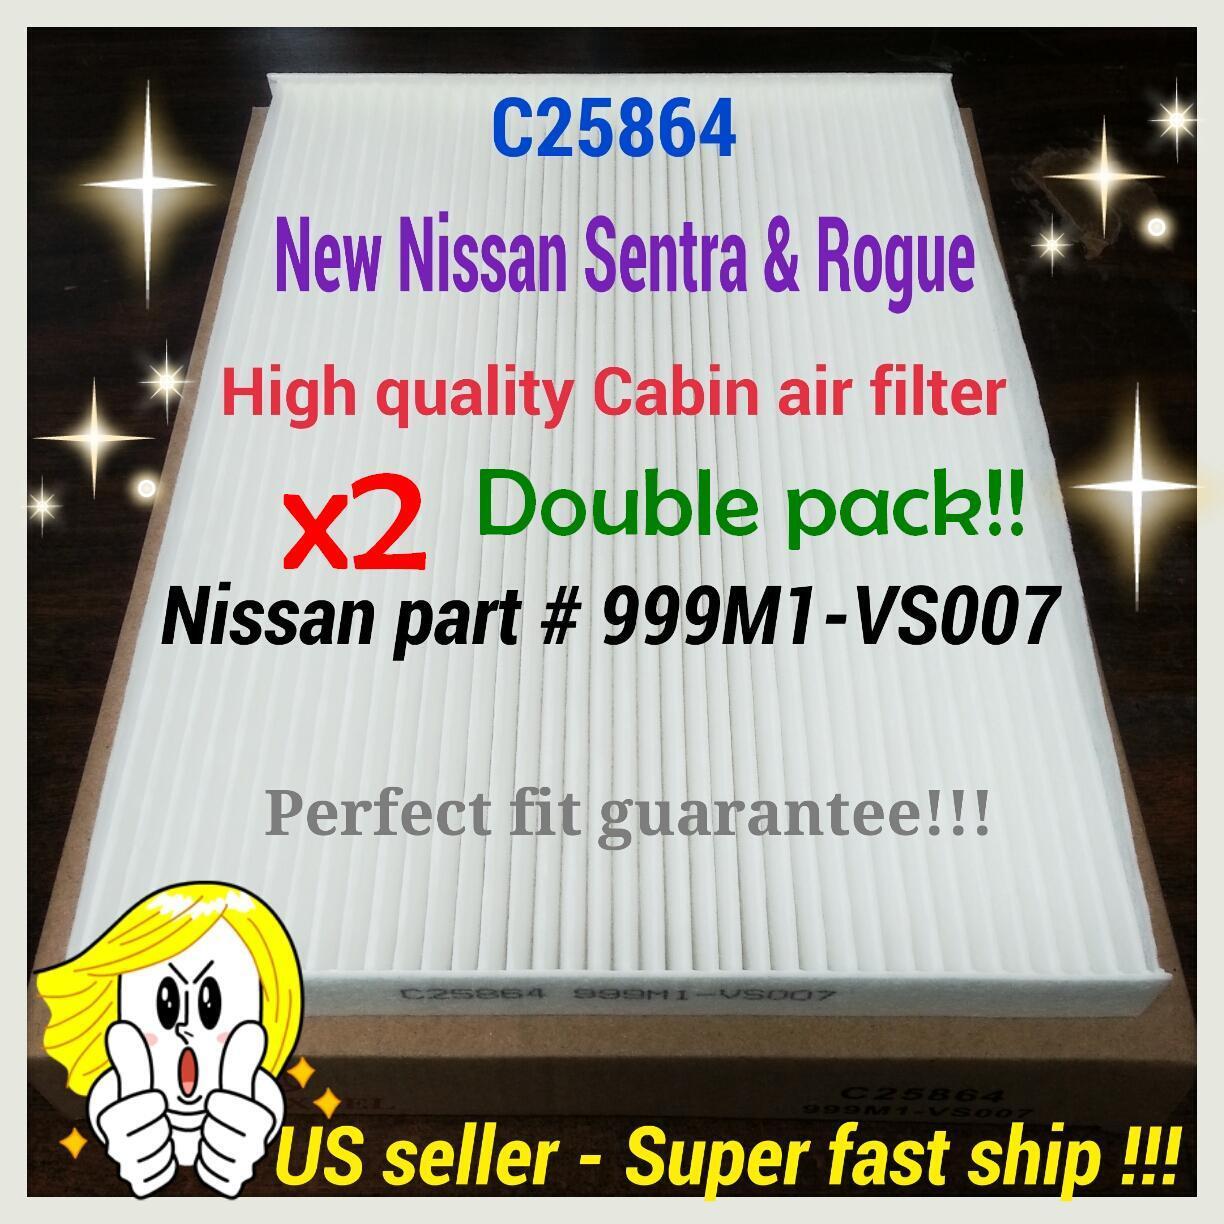 For Rogue Sentra High Quality Cabin Air Filter C25864x2 Perfect Fit Guarantee 